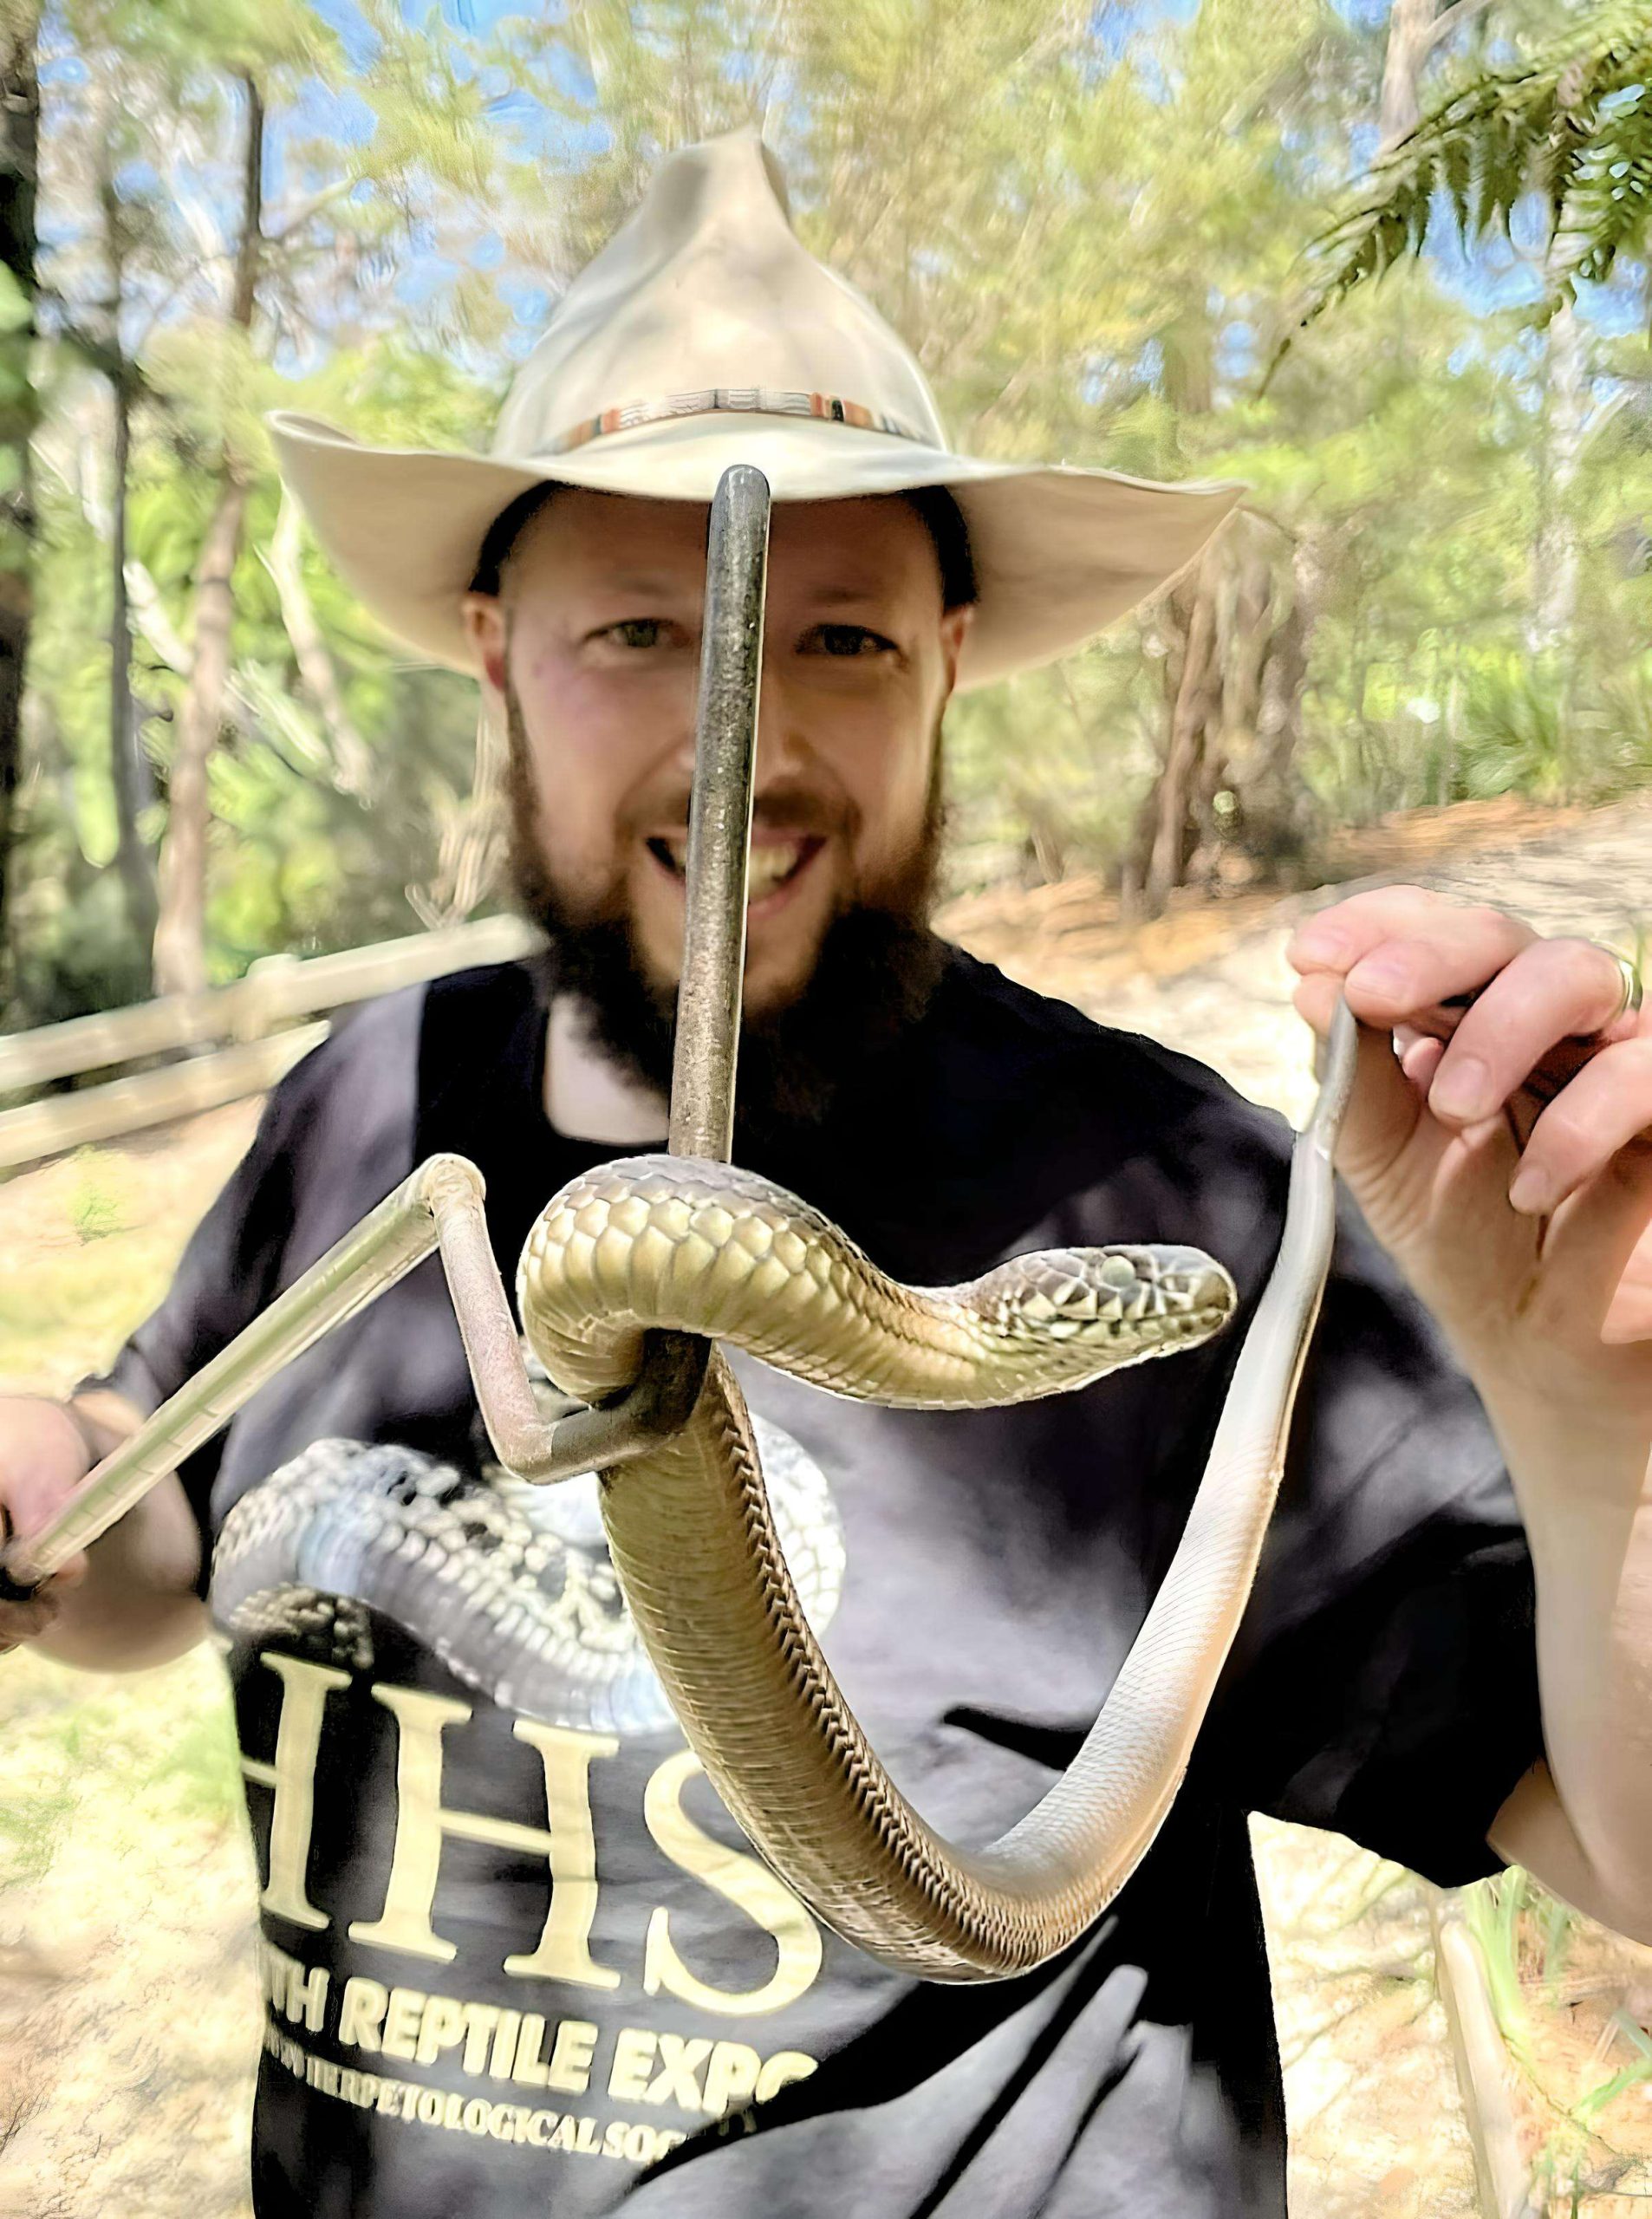 Troy the reptile bloke with a snake